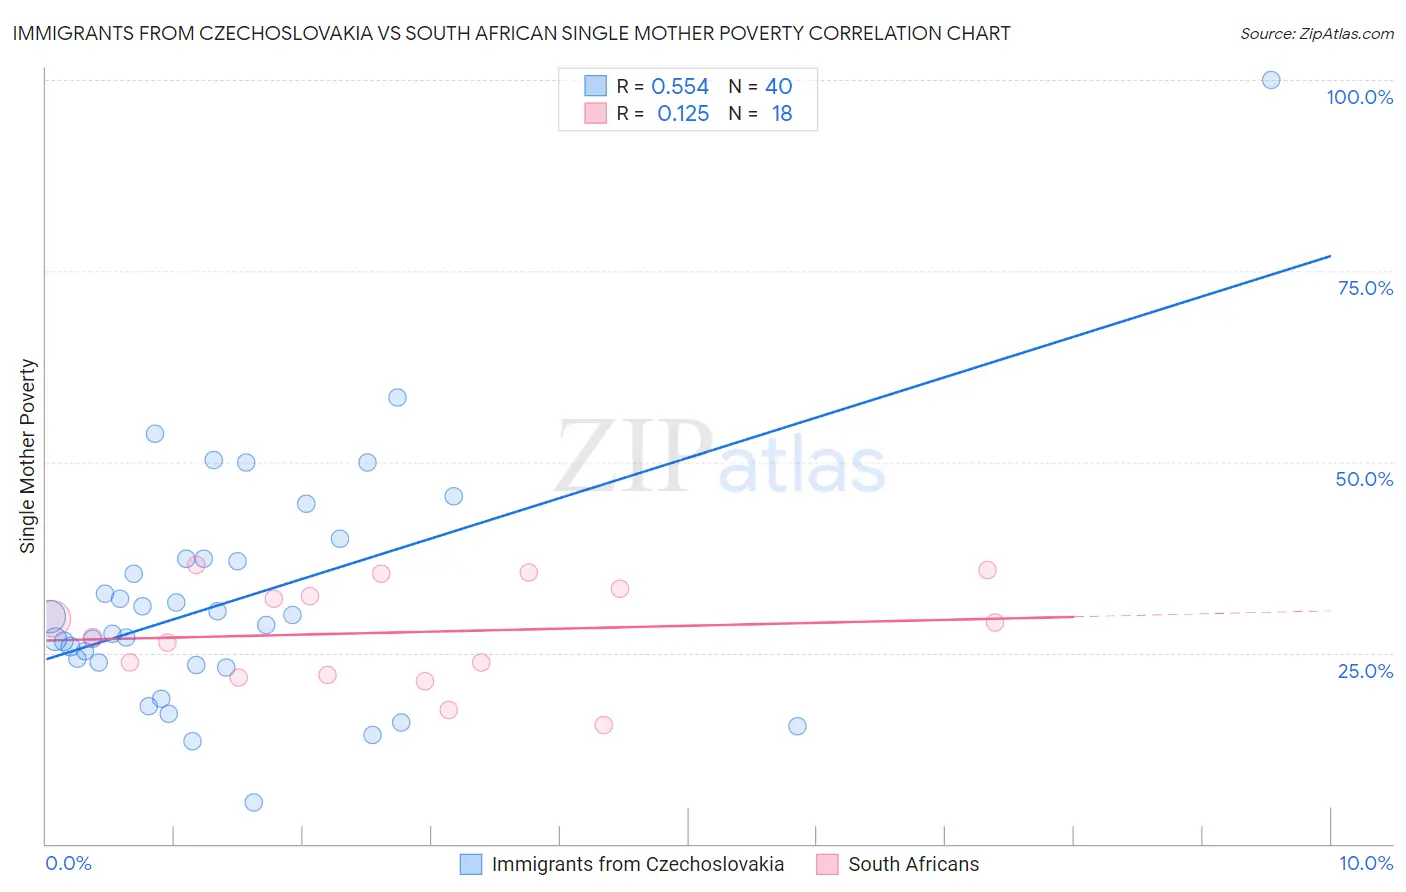 Immigrants from Czechoslovakia vs South African Single Mother Poverty